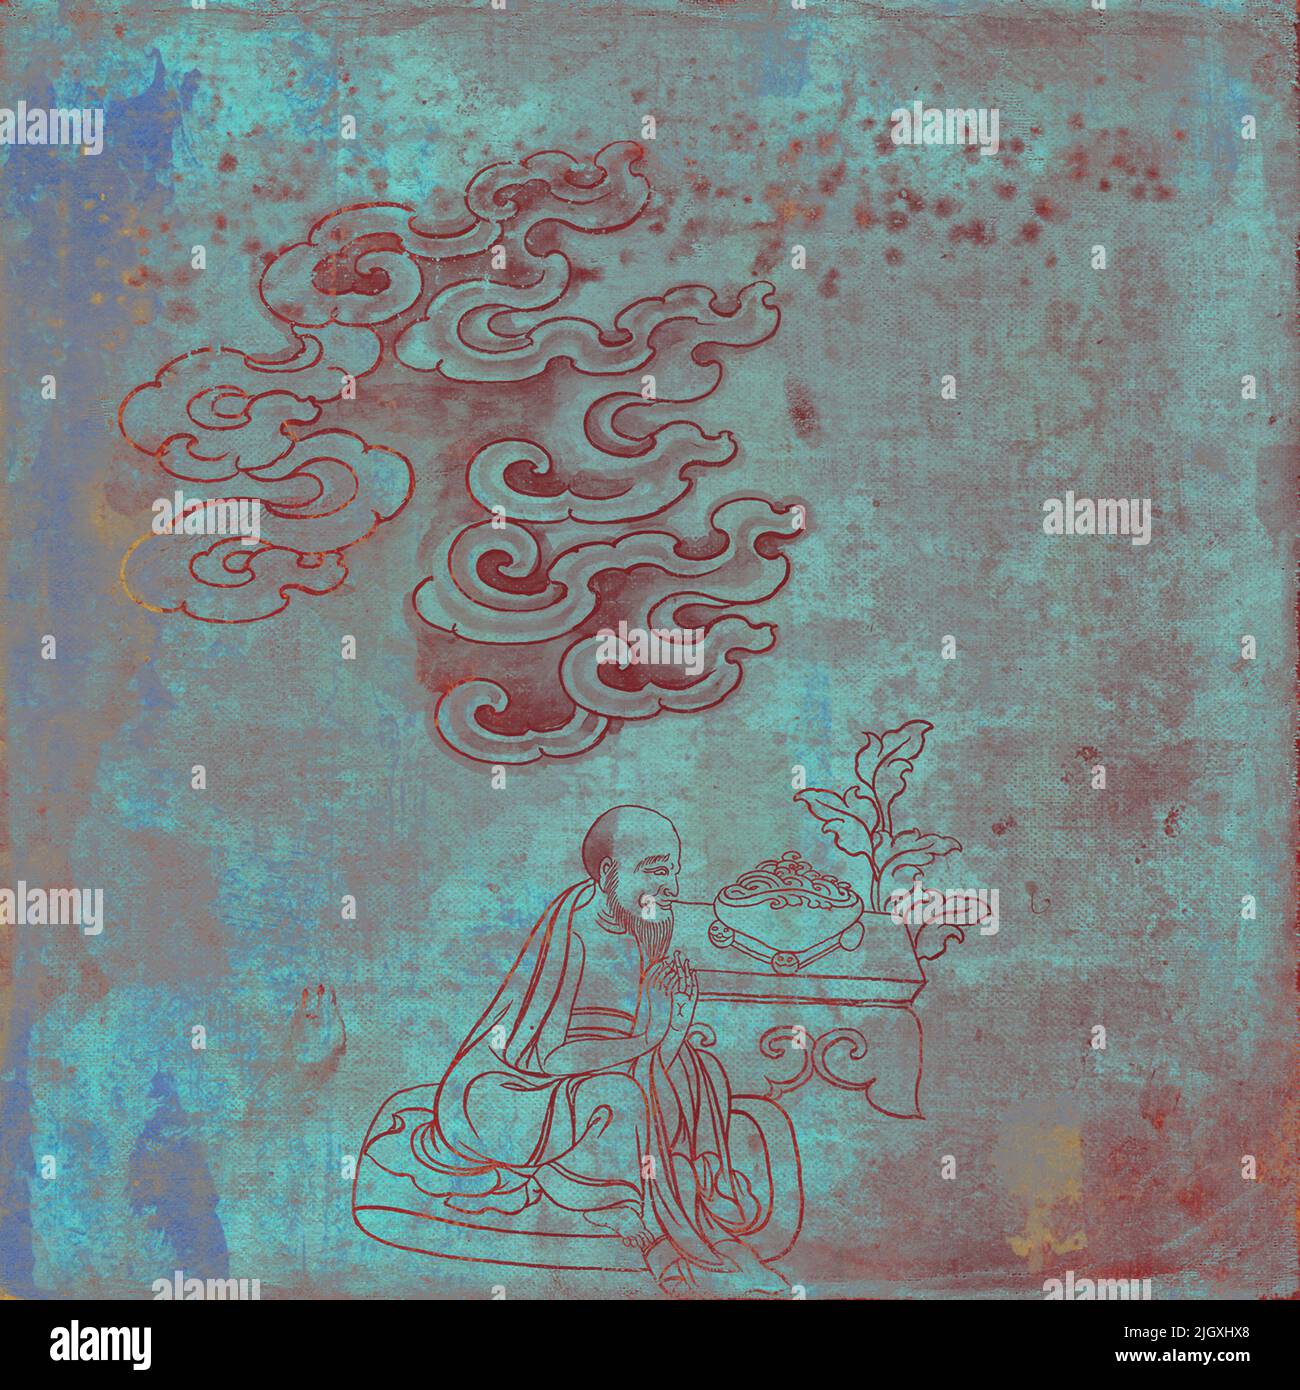 Antique grunge buddha illustrations with abstract colors and textures. Old man offering blessing before eating, Stock Photo